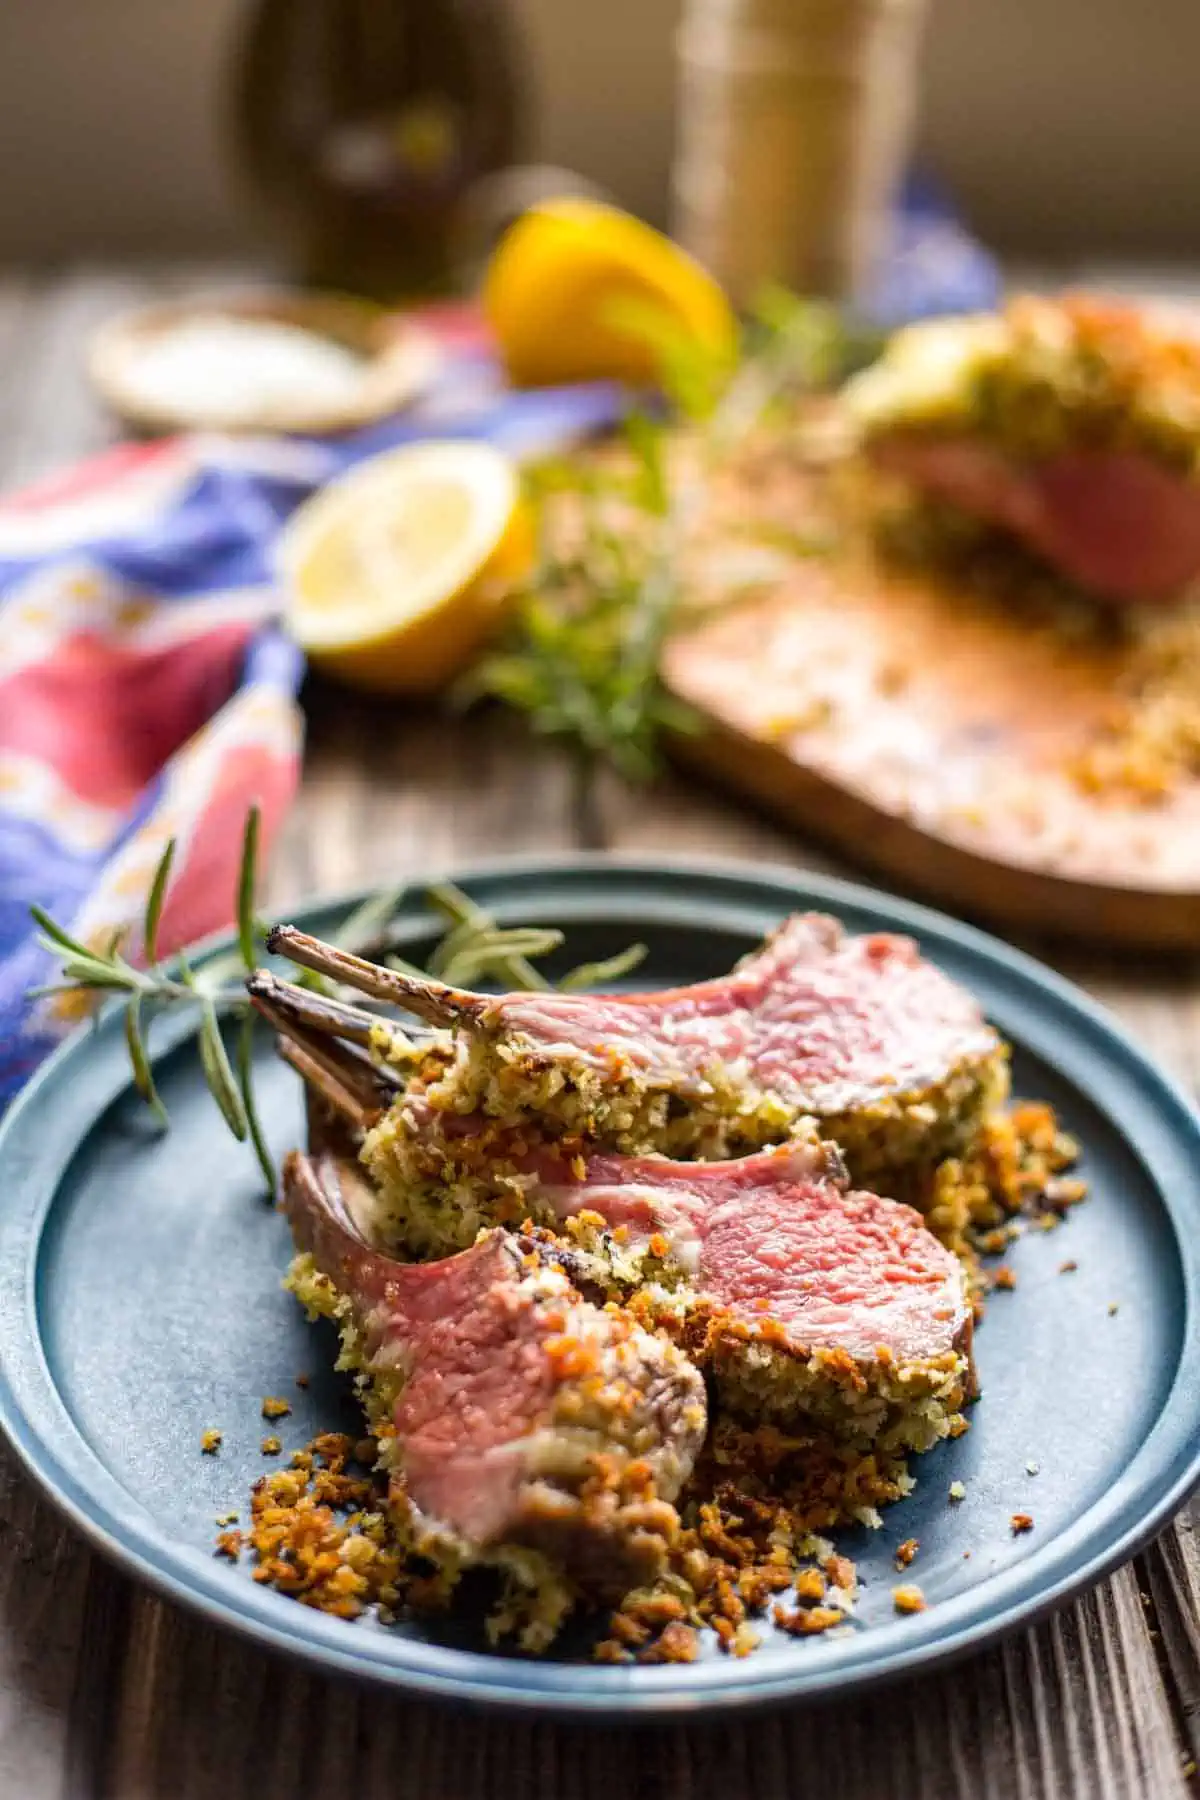 DIjon and herb crusted lamb chops on a blue plate with a sprig of rosemary.